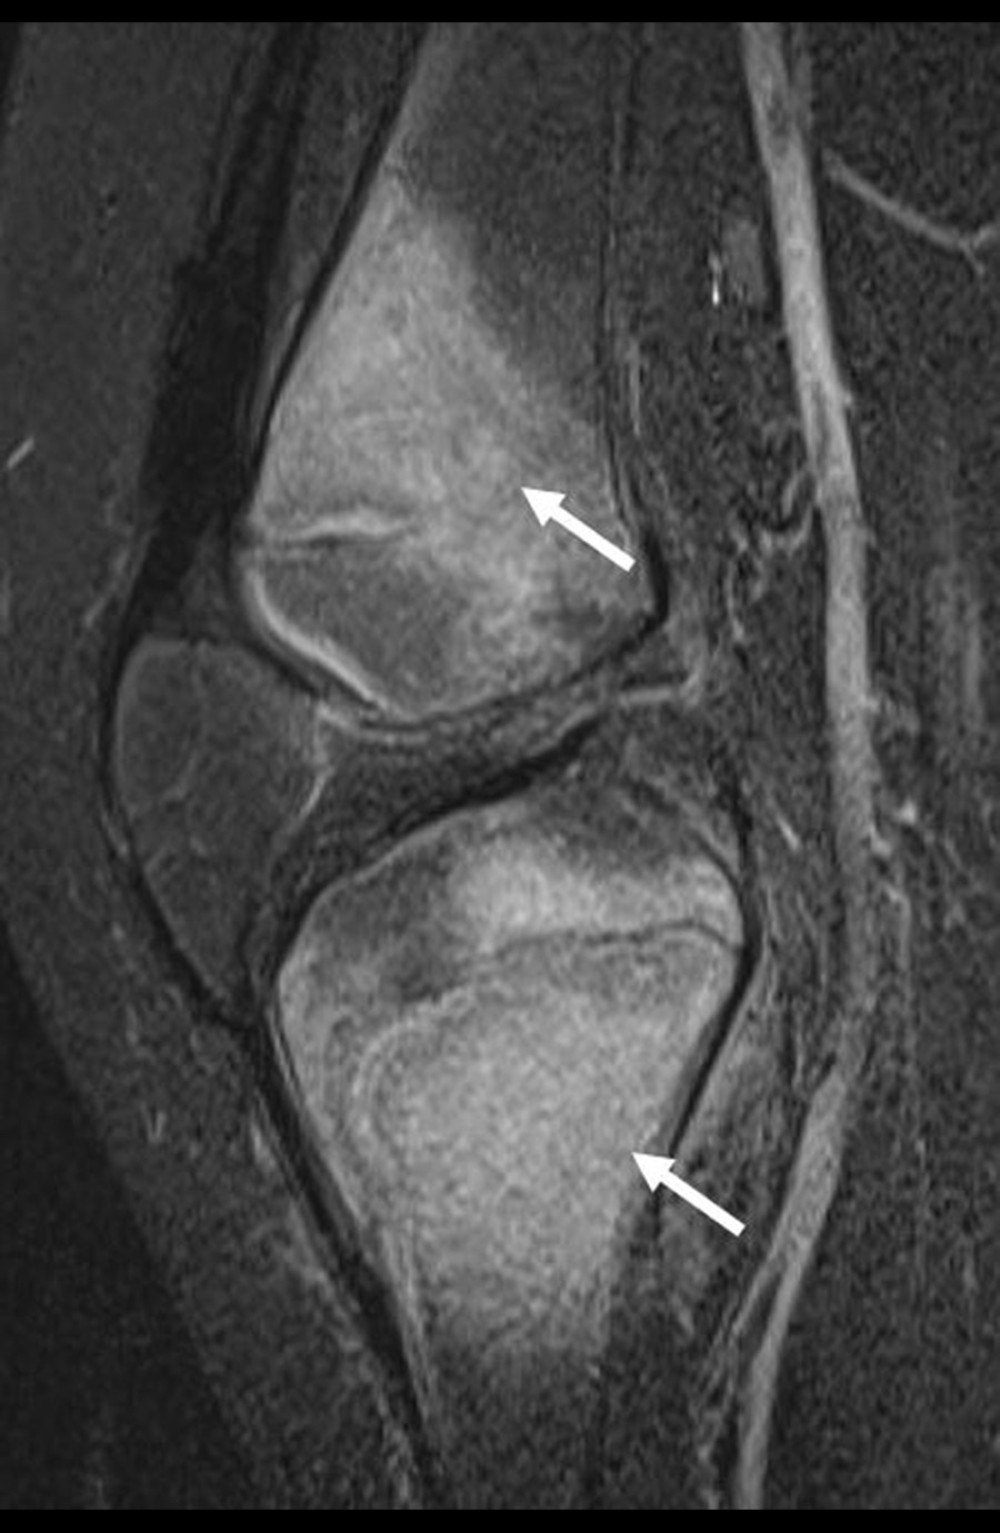 Sagittal short tau inversion recovery image of the right knee demonstrating regional areas of T2 hyperintense signal centered in the distal femoral metaphysis and proximal tibial metaphysis, compatible with the MRI findings of scurvy (arrows) [4,24]. The lack of knee joint effusion, intra-osseous or subperiosteal abscess, argues against osteomyelitis and septic joint. Additionally, osteomyelitis is unlikely to affect the femoral and tibial metaphyses with relative sparing of the epiphyses and without intervening joint effusion [2,4,24]. MRI demonstrates a predictable pattern in scurvy, with symmetric areas of T2 hyperintensity and enhancement predominately in the long-bone metaphyses [2,4,5,24]. Subperiosteal fluid and soft-tissue edema may also be seen [4,24].